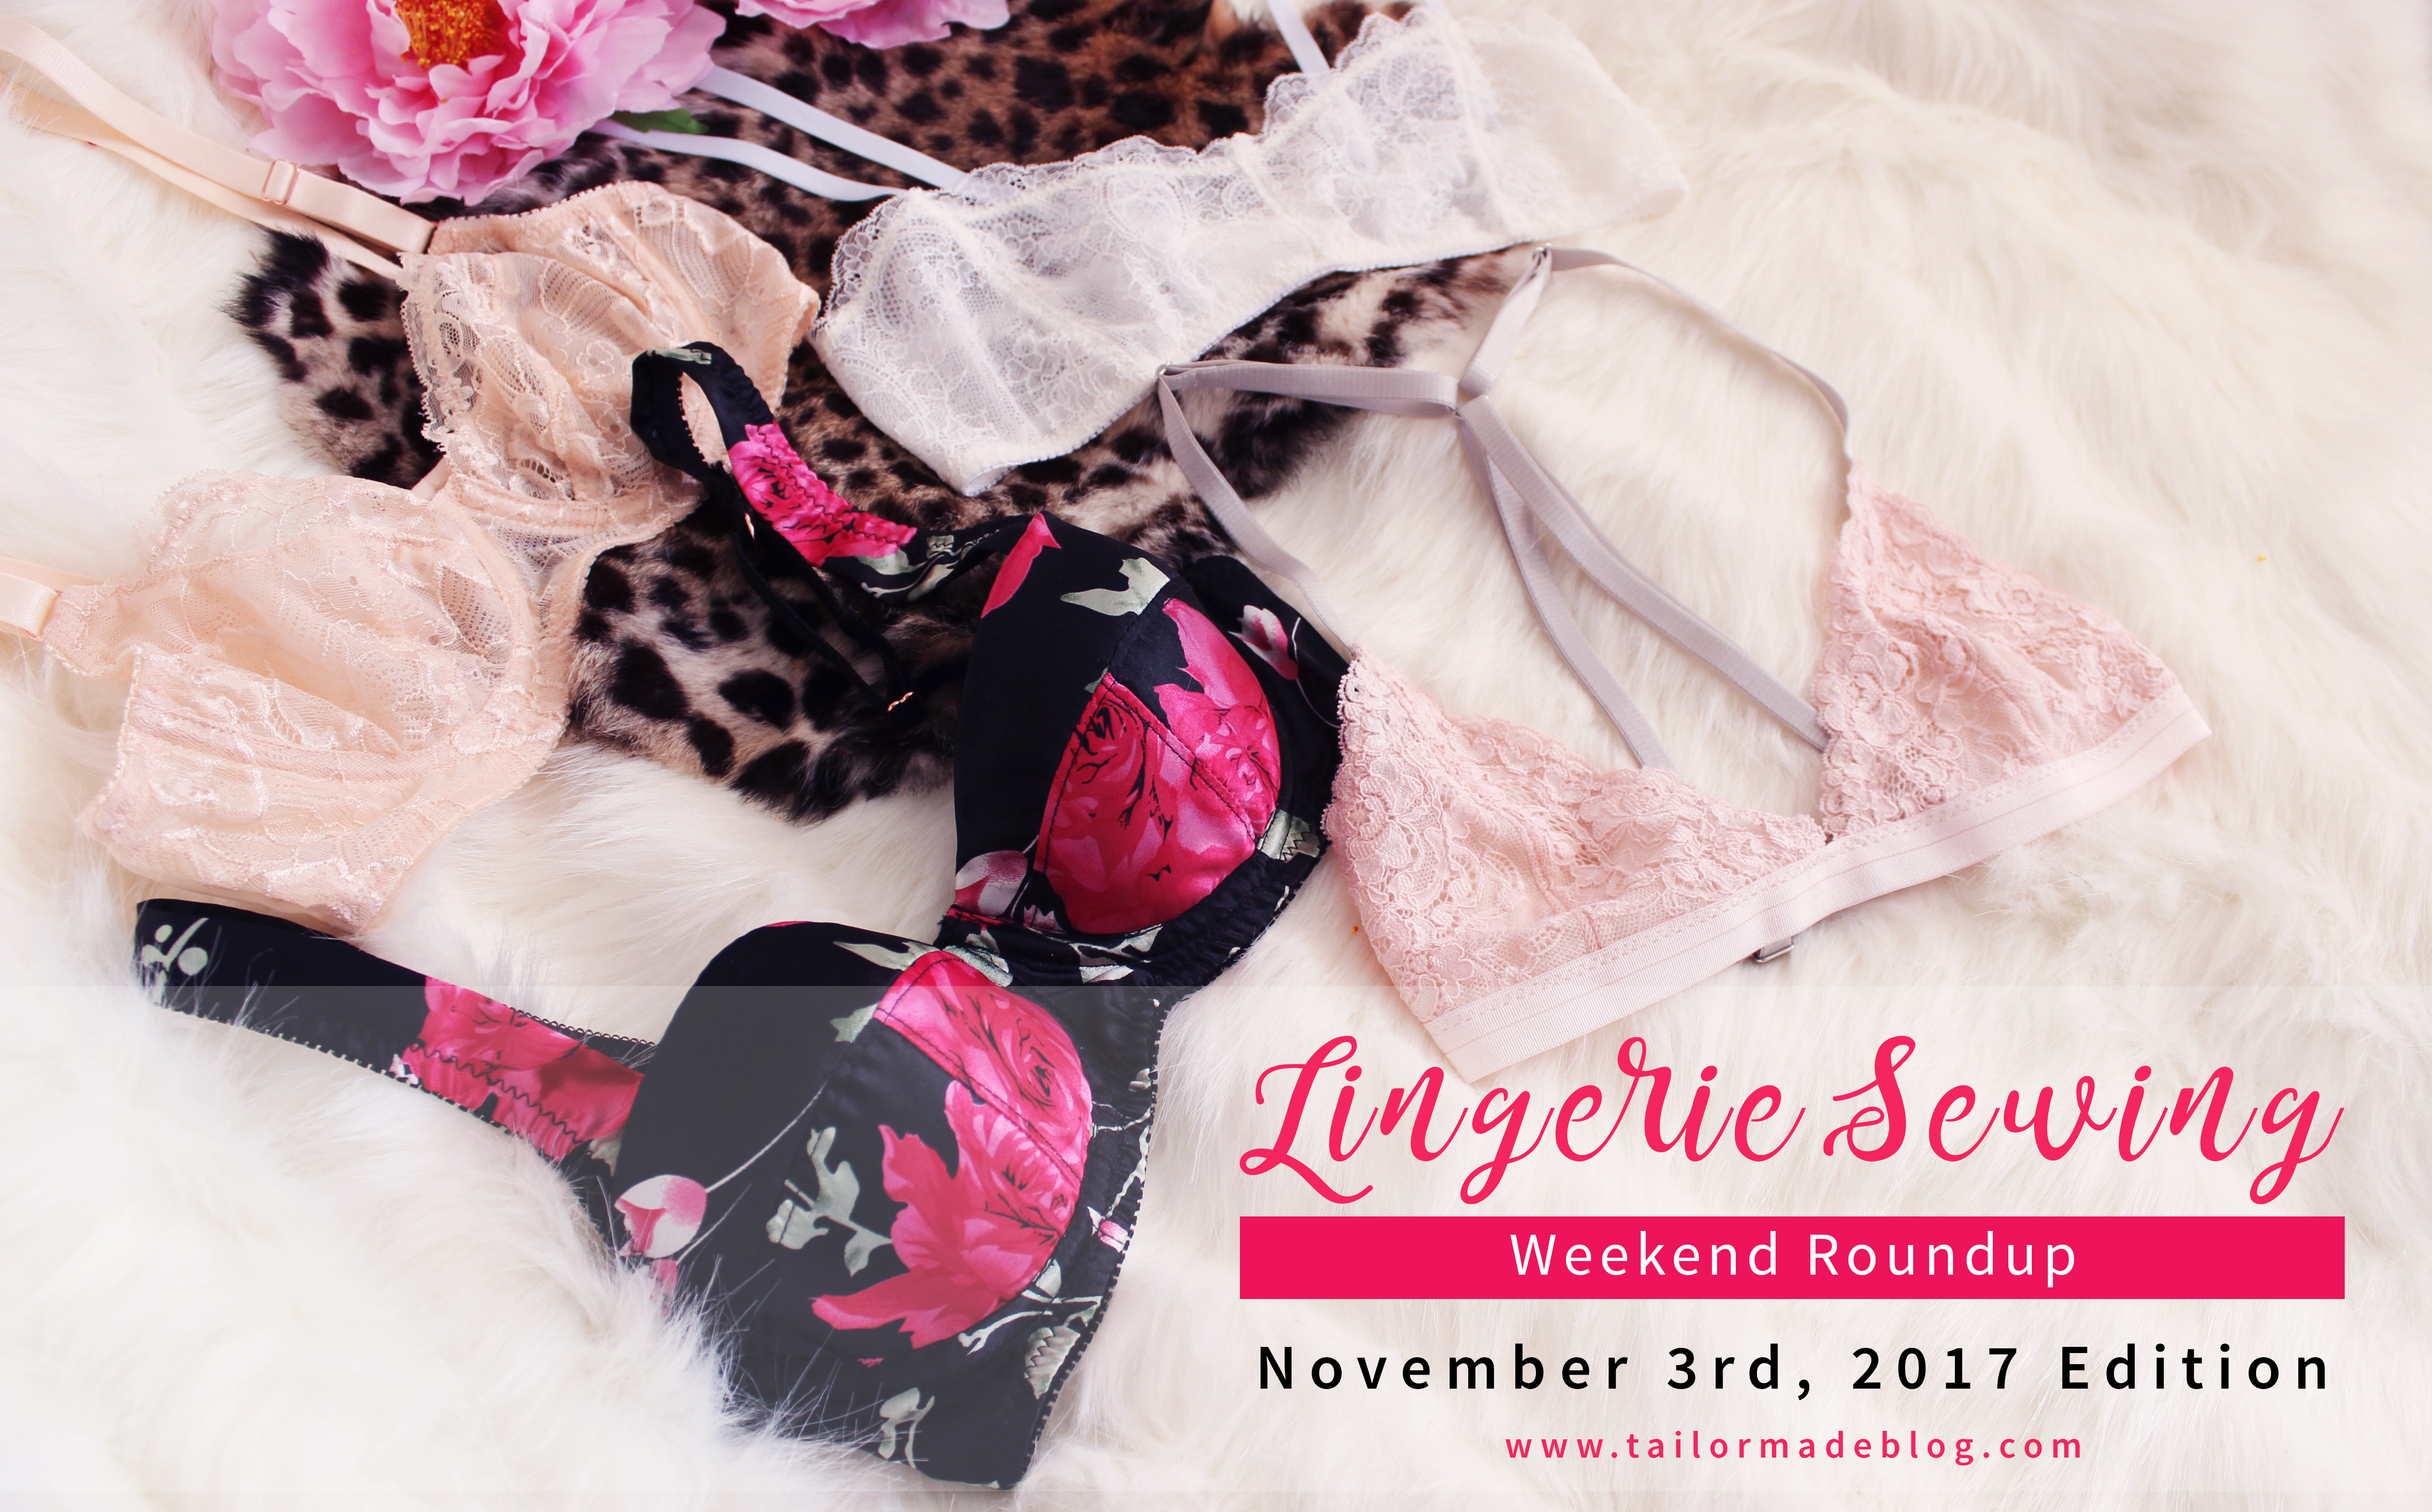 November 3rd 2017 Lingerie Sewing Weekend Round Up Latest news and makes and sewing projects from the lingerie sewing bra making community